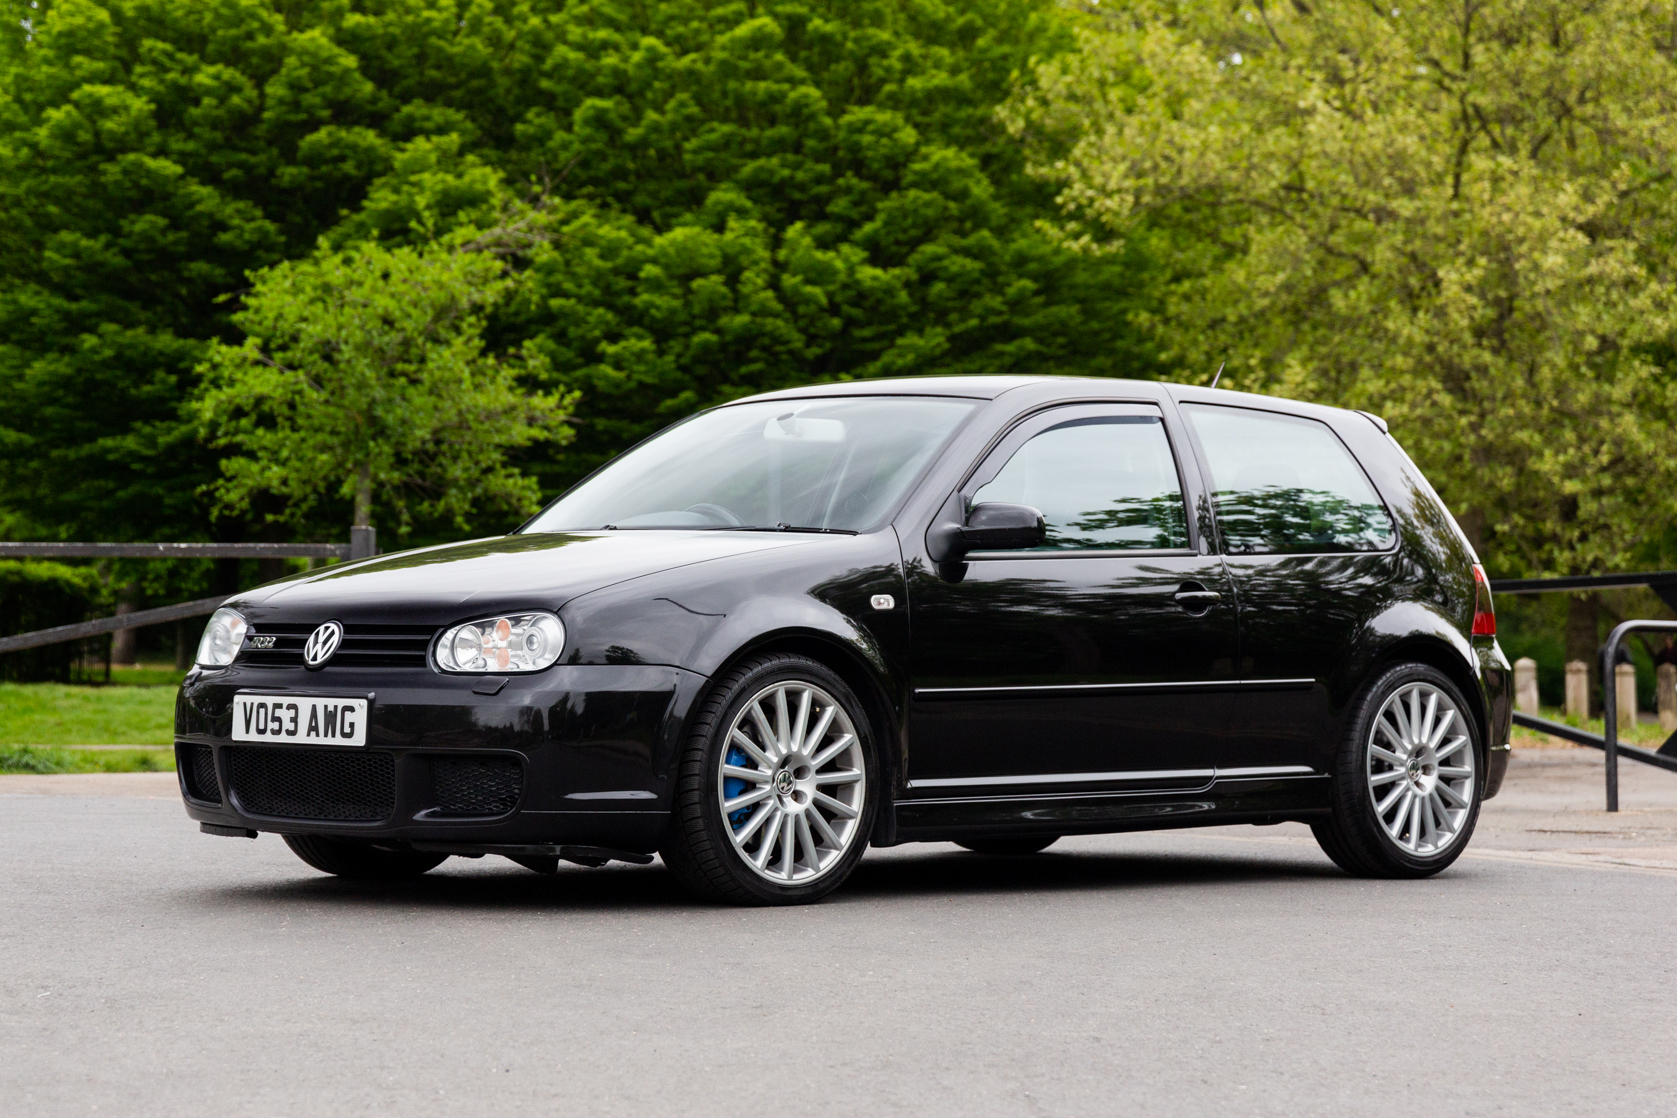 2003 VOLKSWAGEN GOLF (MK4) R32 for sale by auction in London, United Kingdom